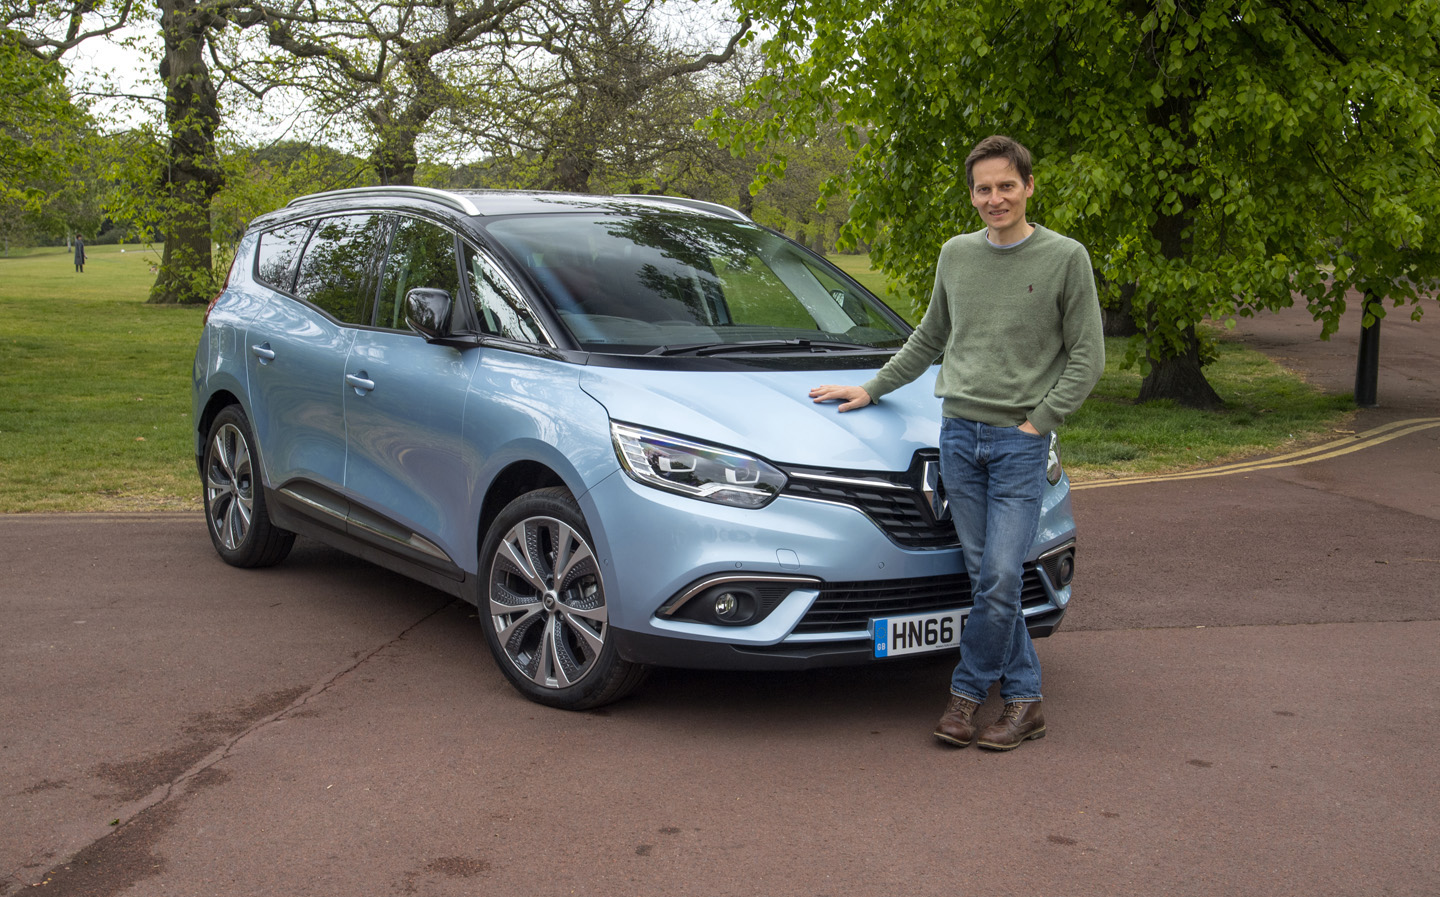 Extended test 2017: James Mills, Renault Grand Scenic